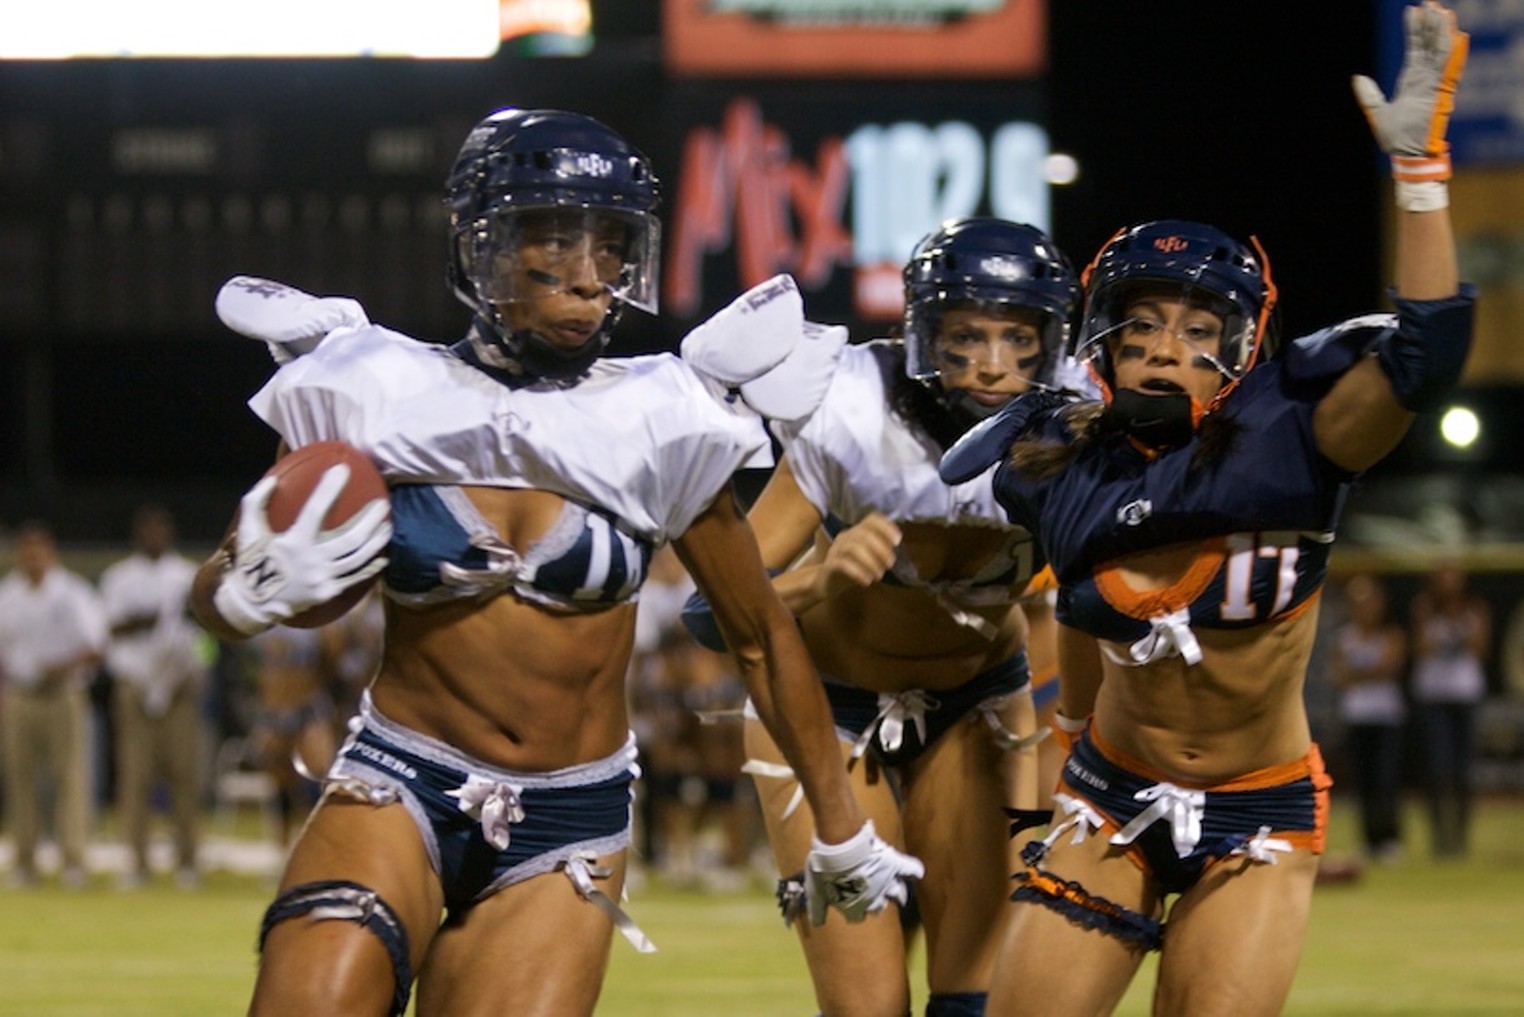 Lingerie Football: This is really happening, Denver